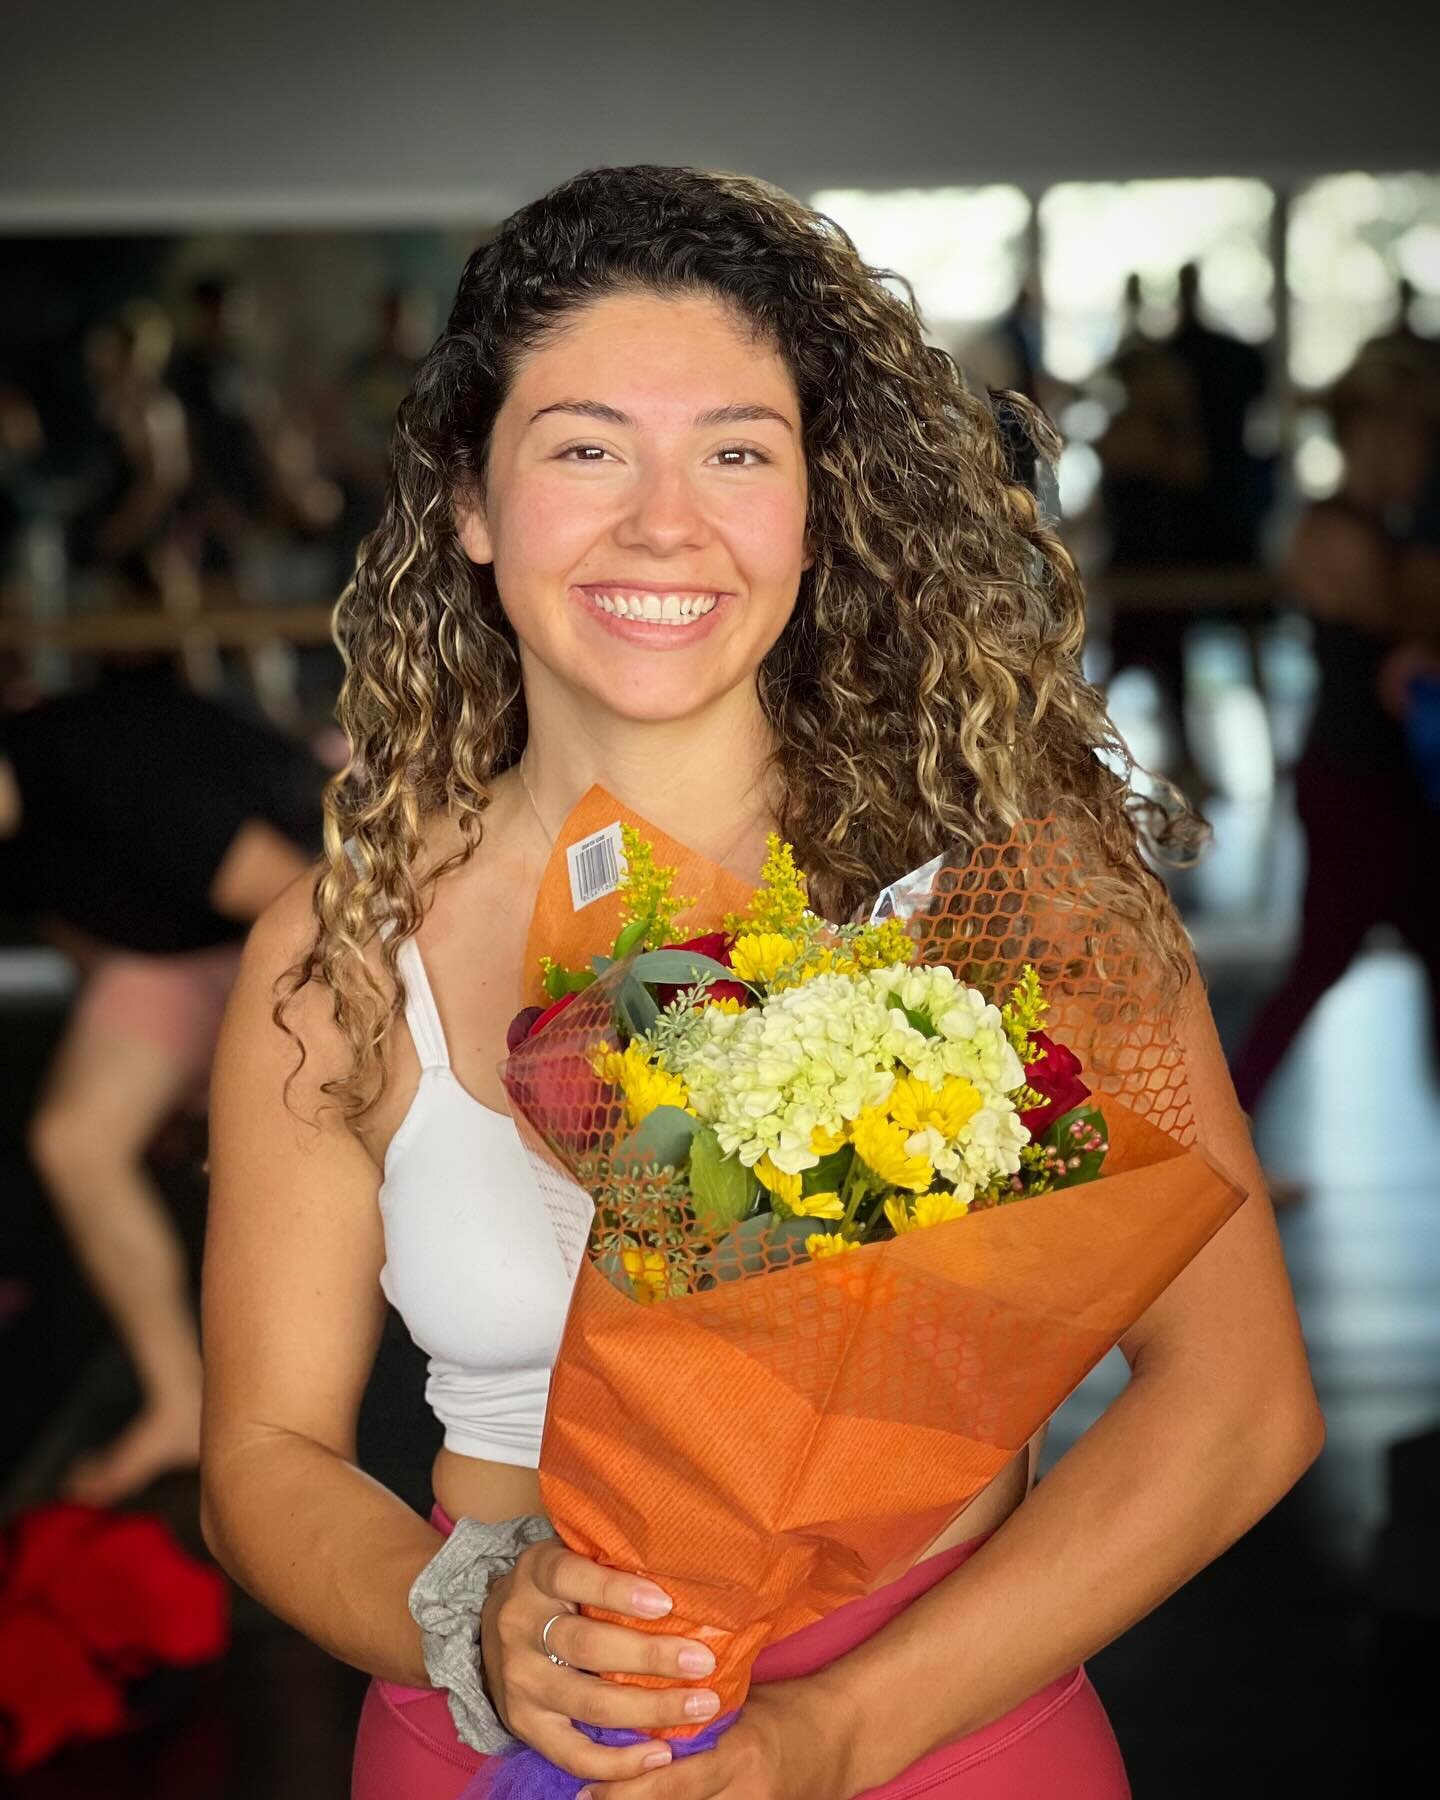 Wishing a radiant and joyous birthday to @danielle_juch! iHeartYoga&rsquo;s newest yoga instructor! 🎉 One year ago, she graduated from iHeartYoga&rsquo;s teacher training program with unwavering dedication, passion, and a commitment to excellence. A